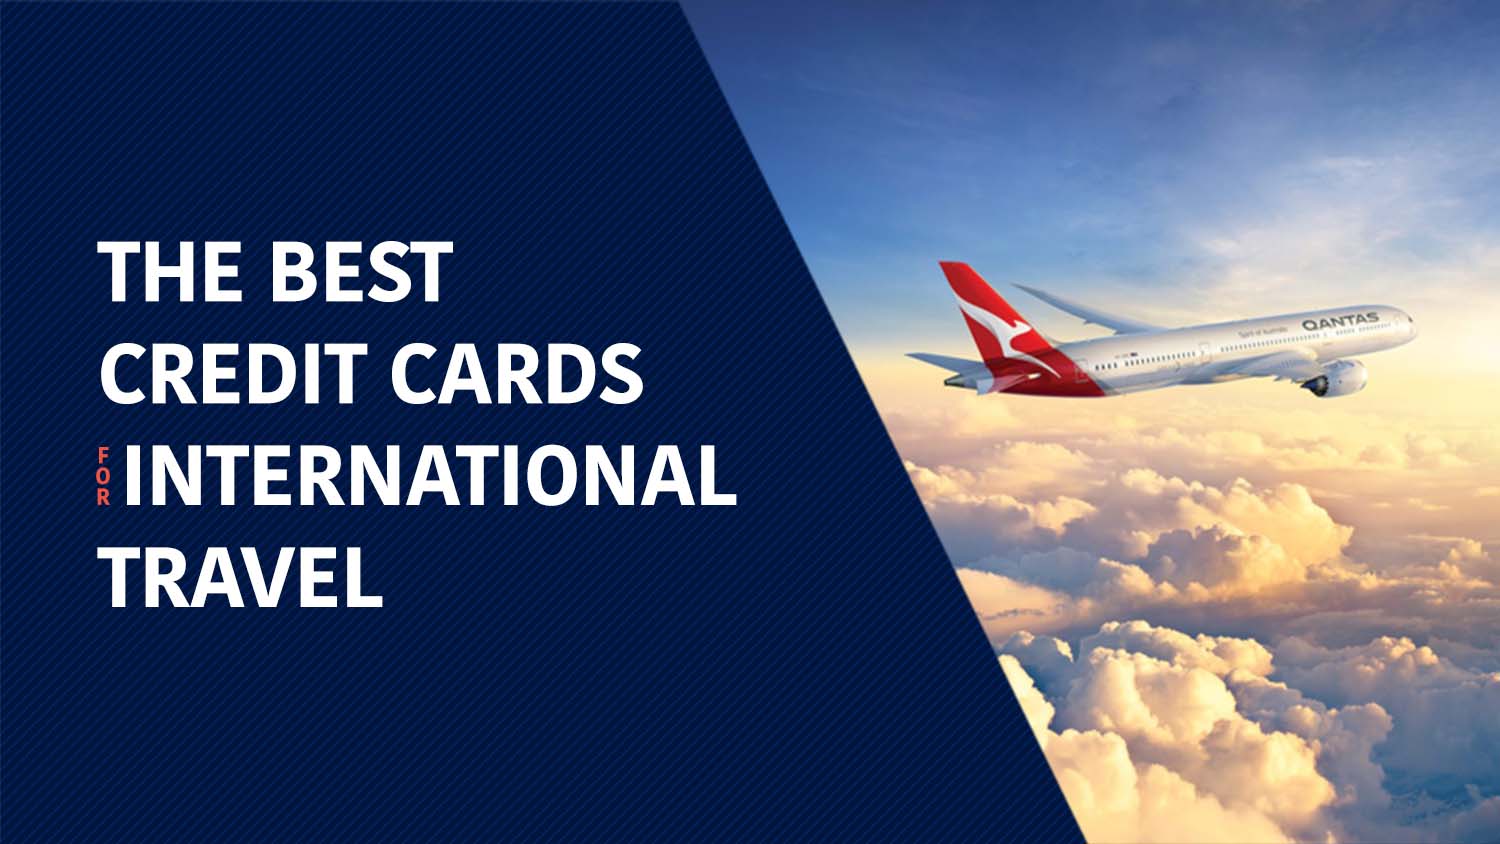 The best credit cards for international travel